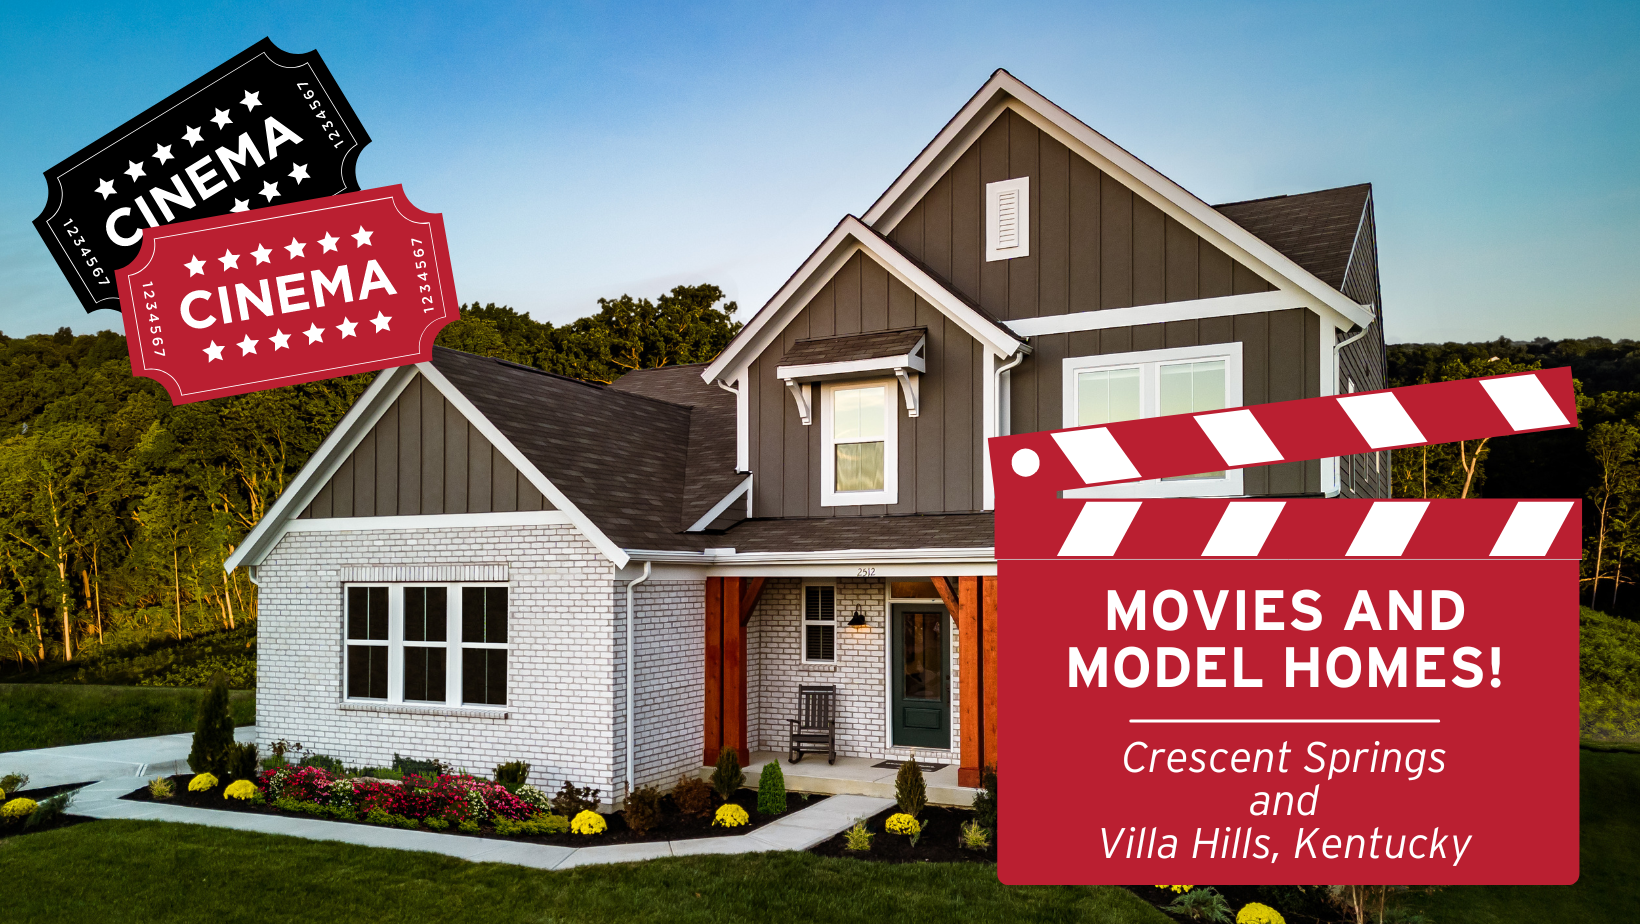 Movies & Model Homes in Crescent Springs & Villa Hills, KY!